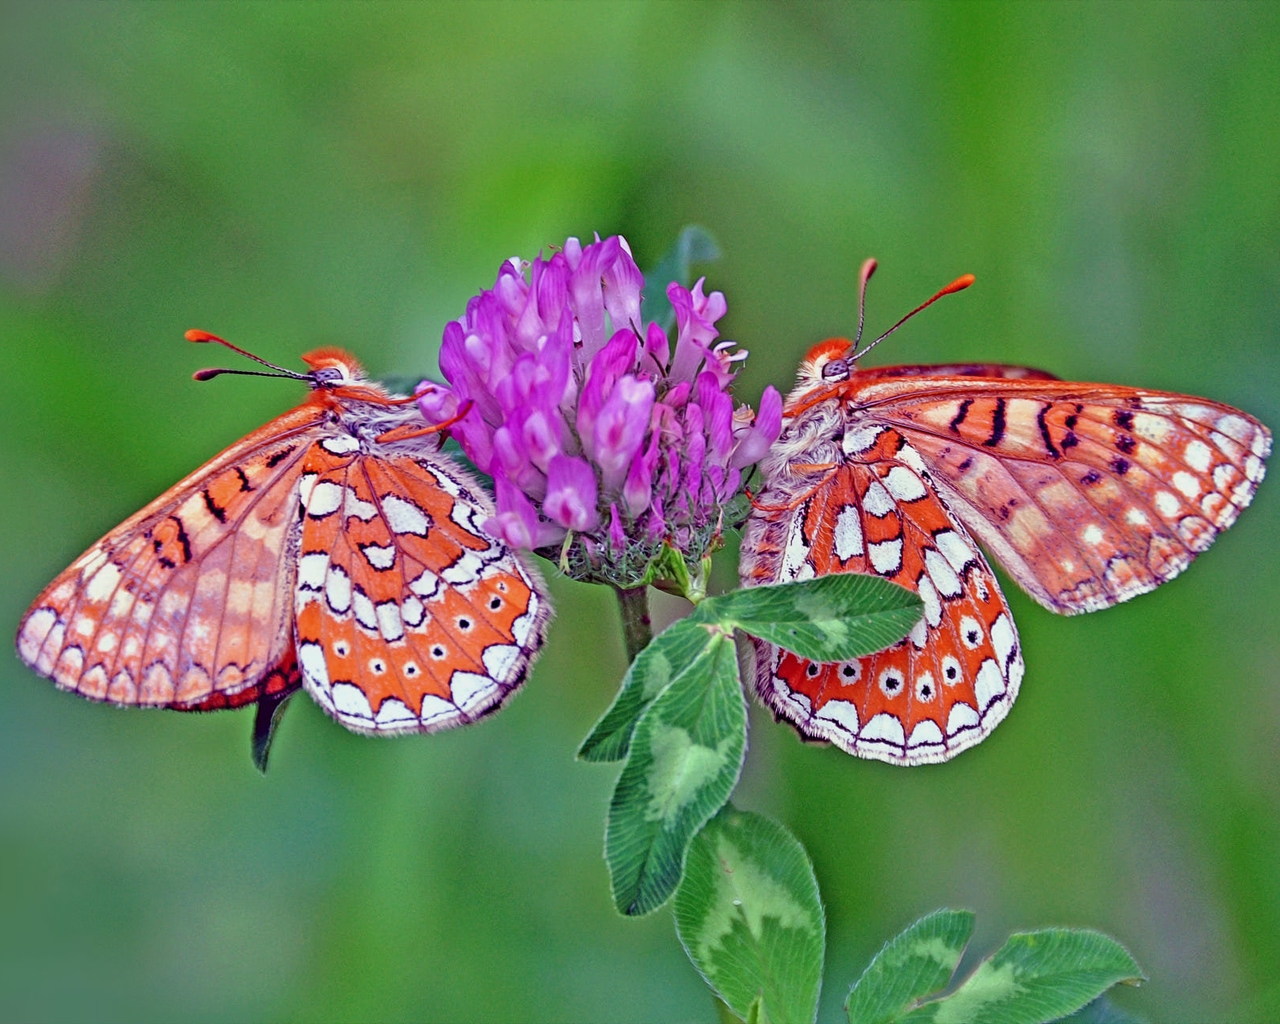 Image: Butterfly, wings, clover, sitting